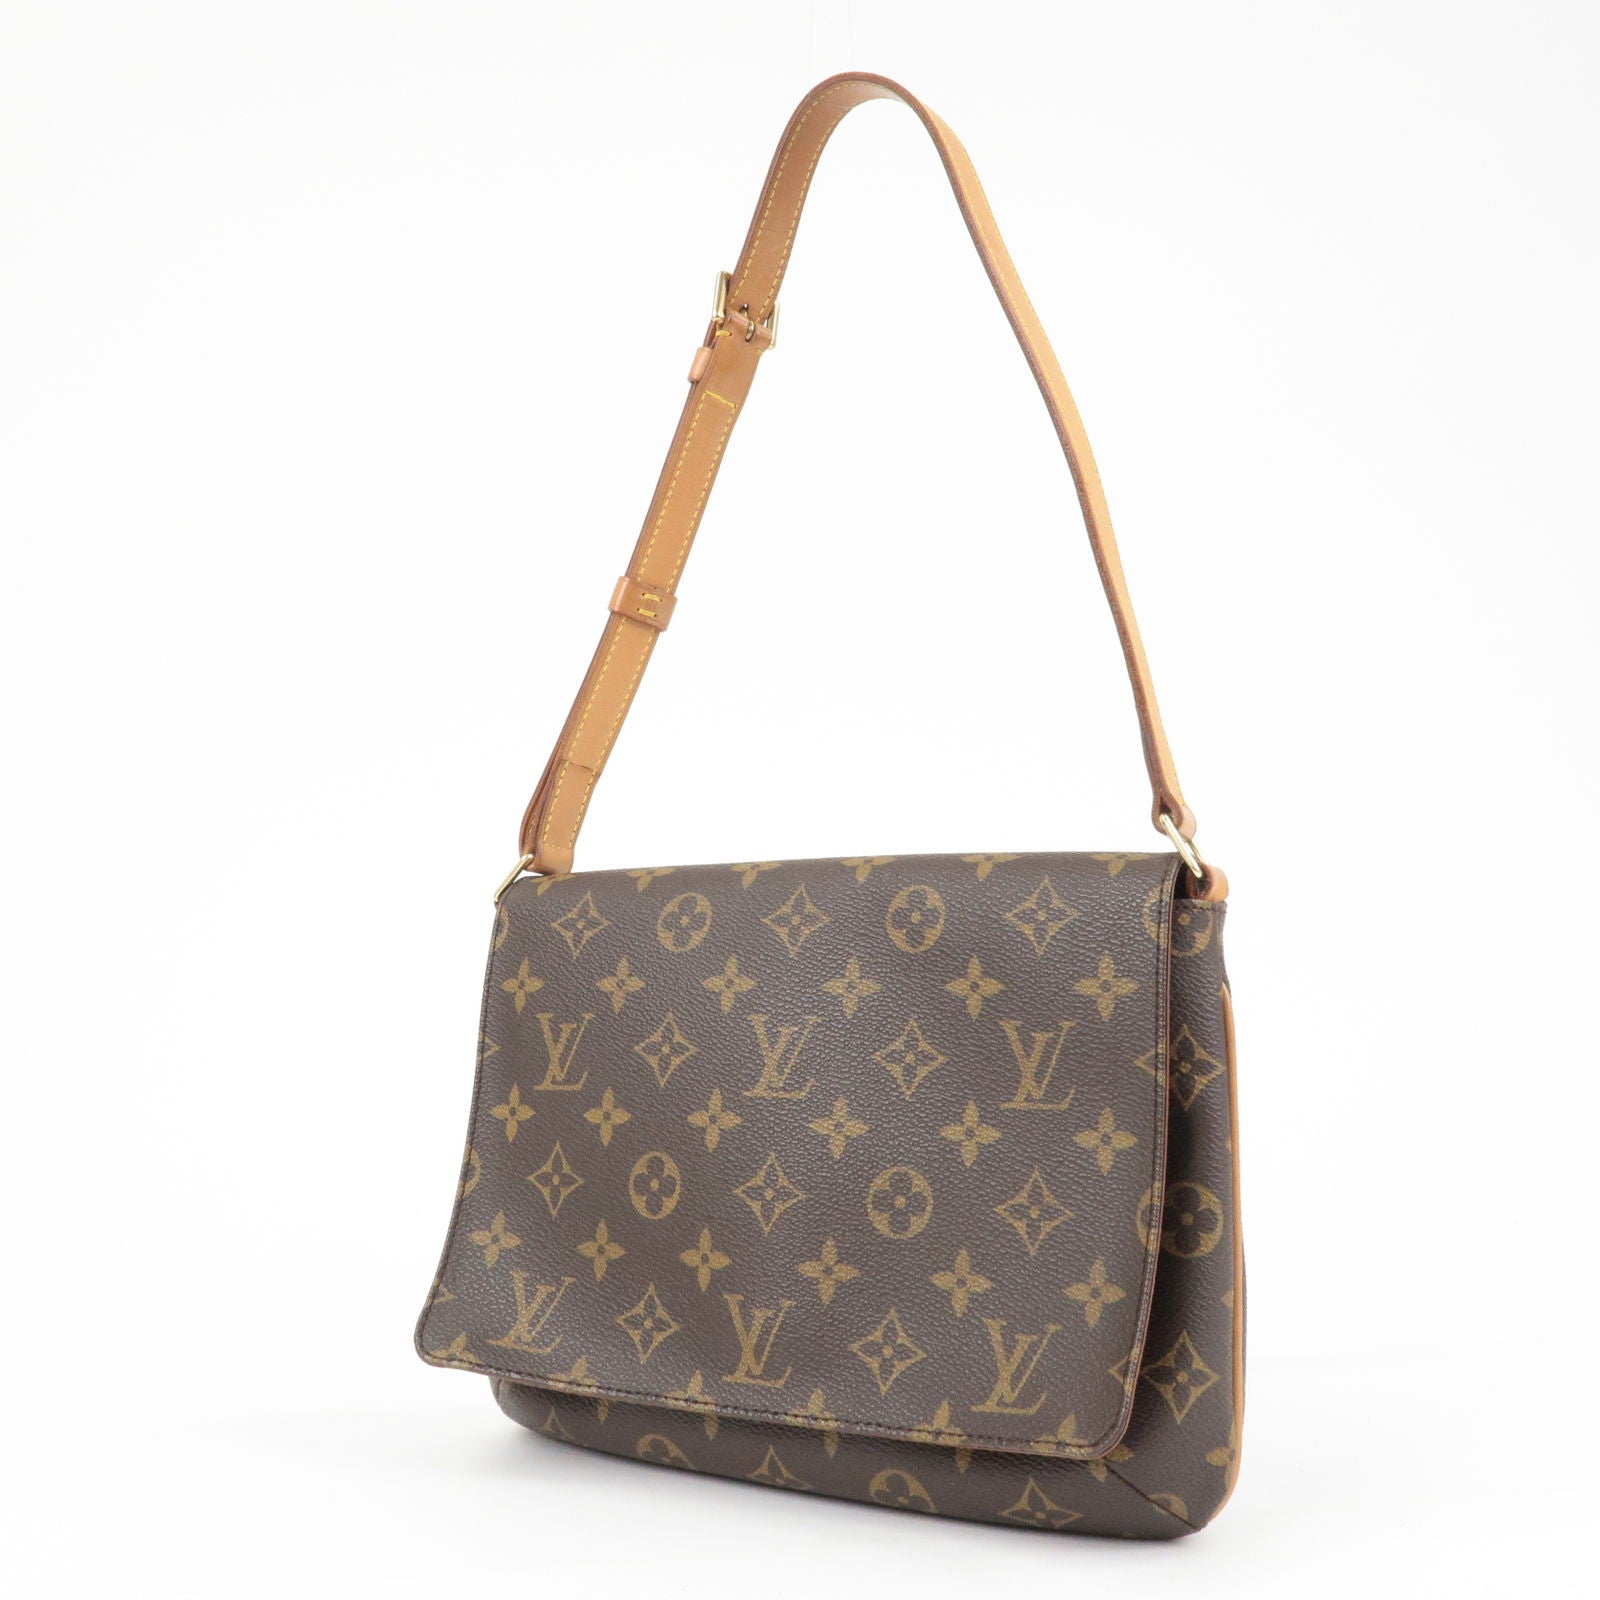 Louis Vuitton 2013 pre-owned Limited Edition Speedy Cube PM Bag - Farfetch